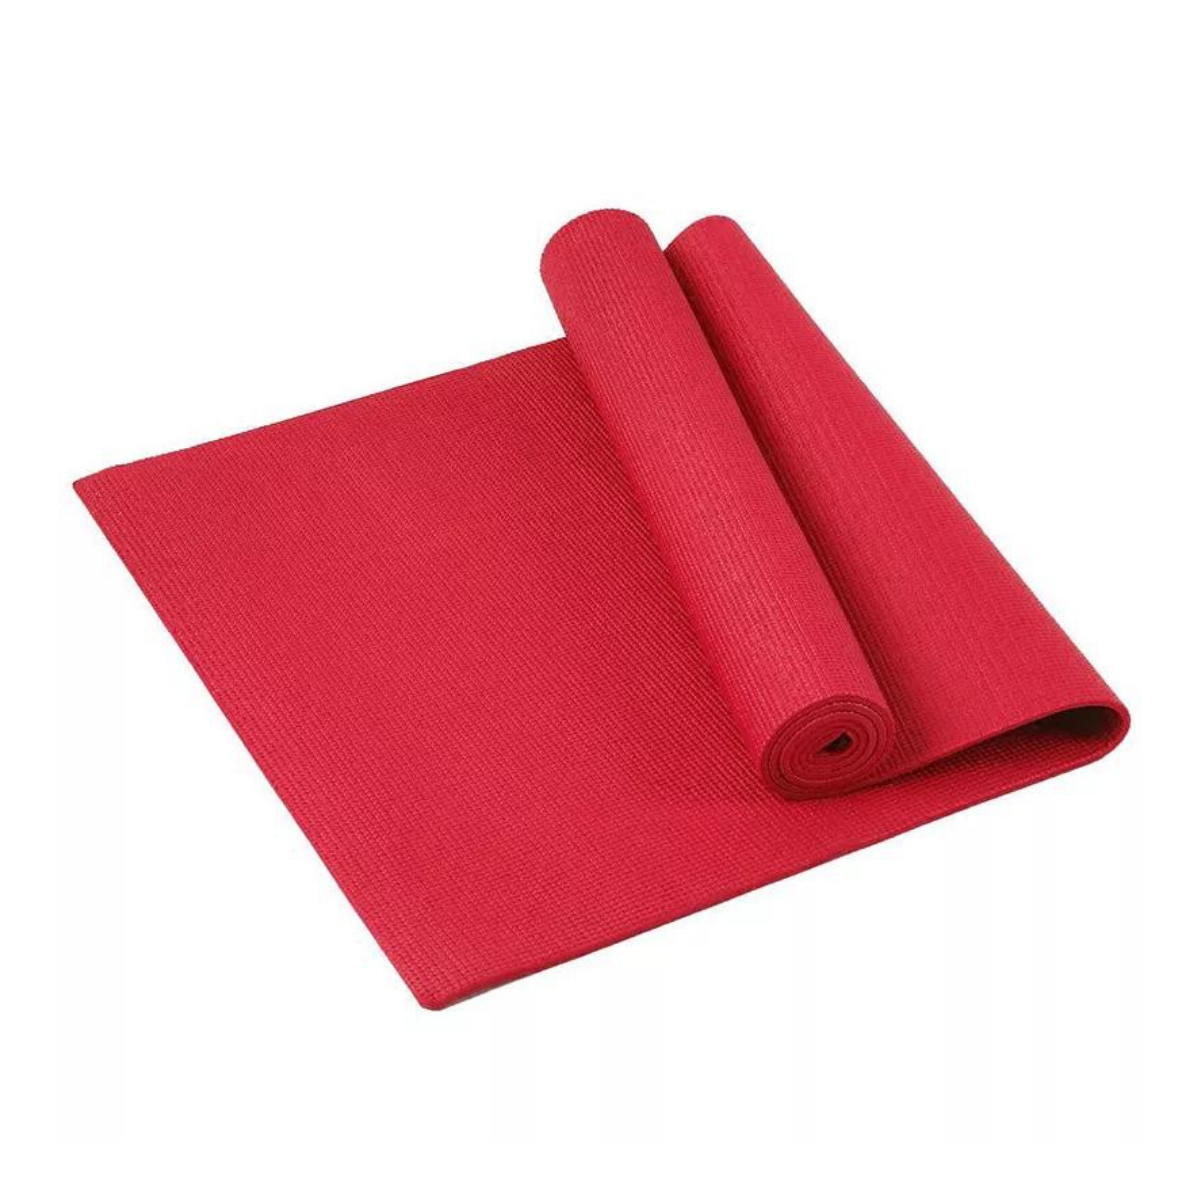 Performance Yoga Mat With Carrying Straps - Red